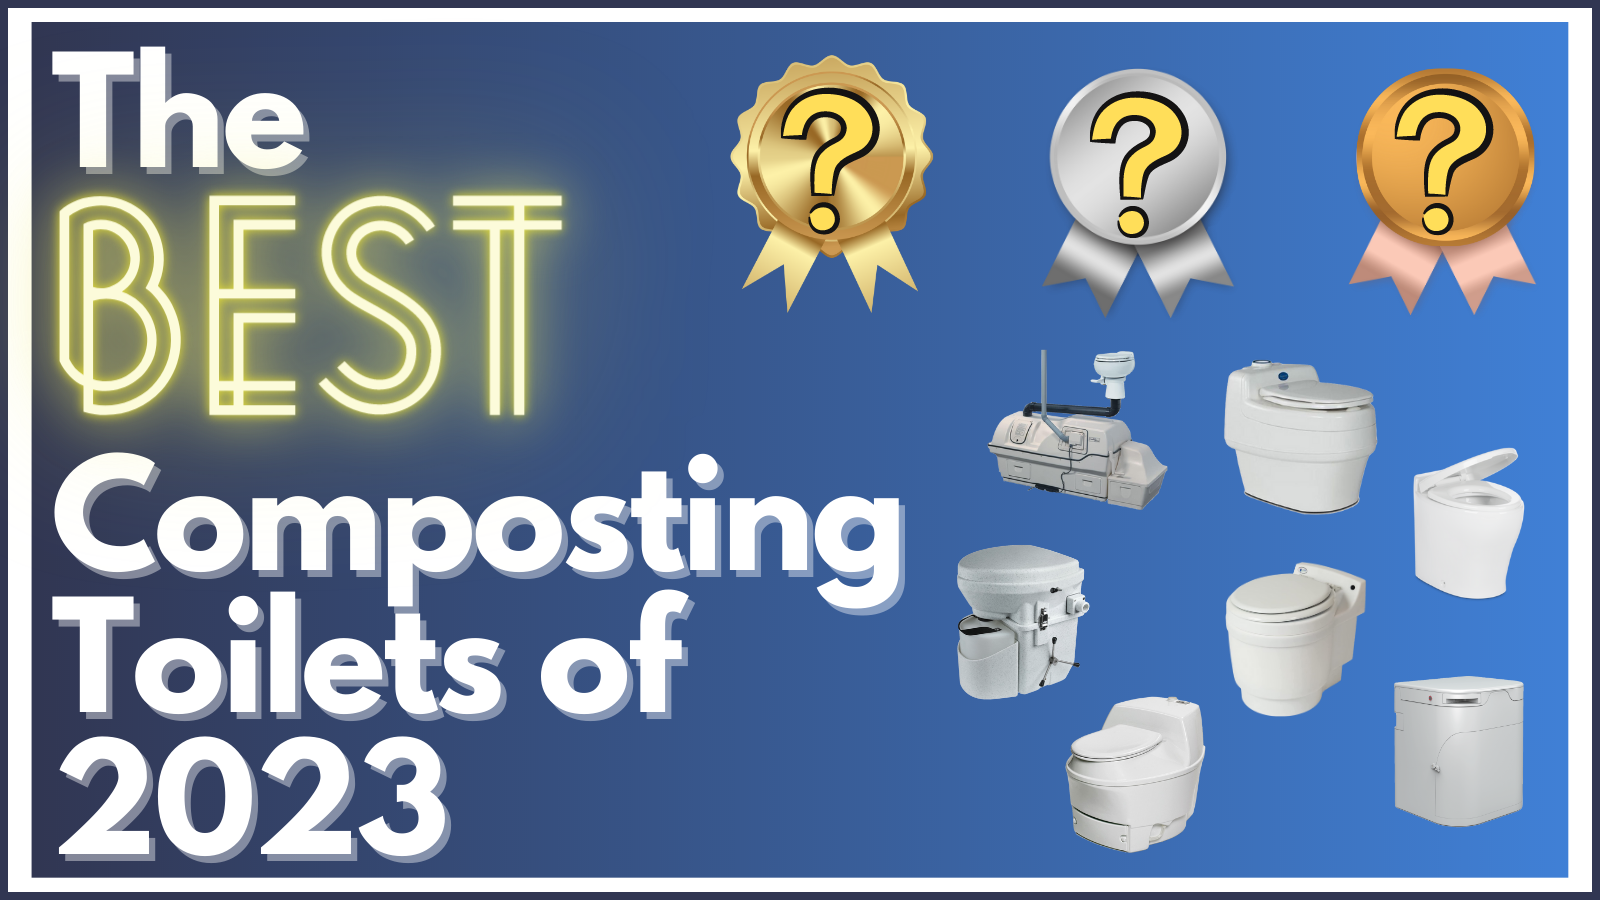 Composting Toilets: What They Are + The Best Composting Toilets of 2023